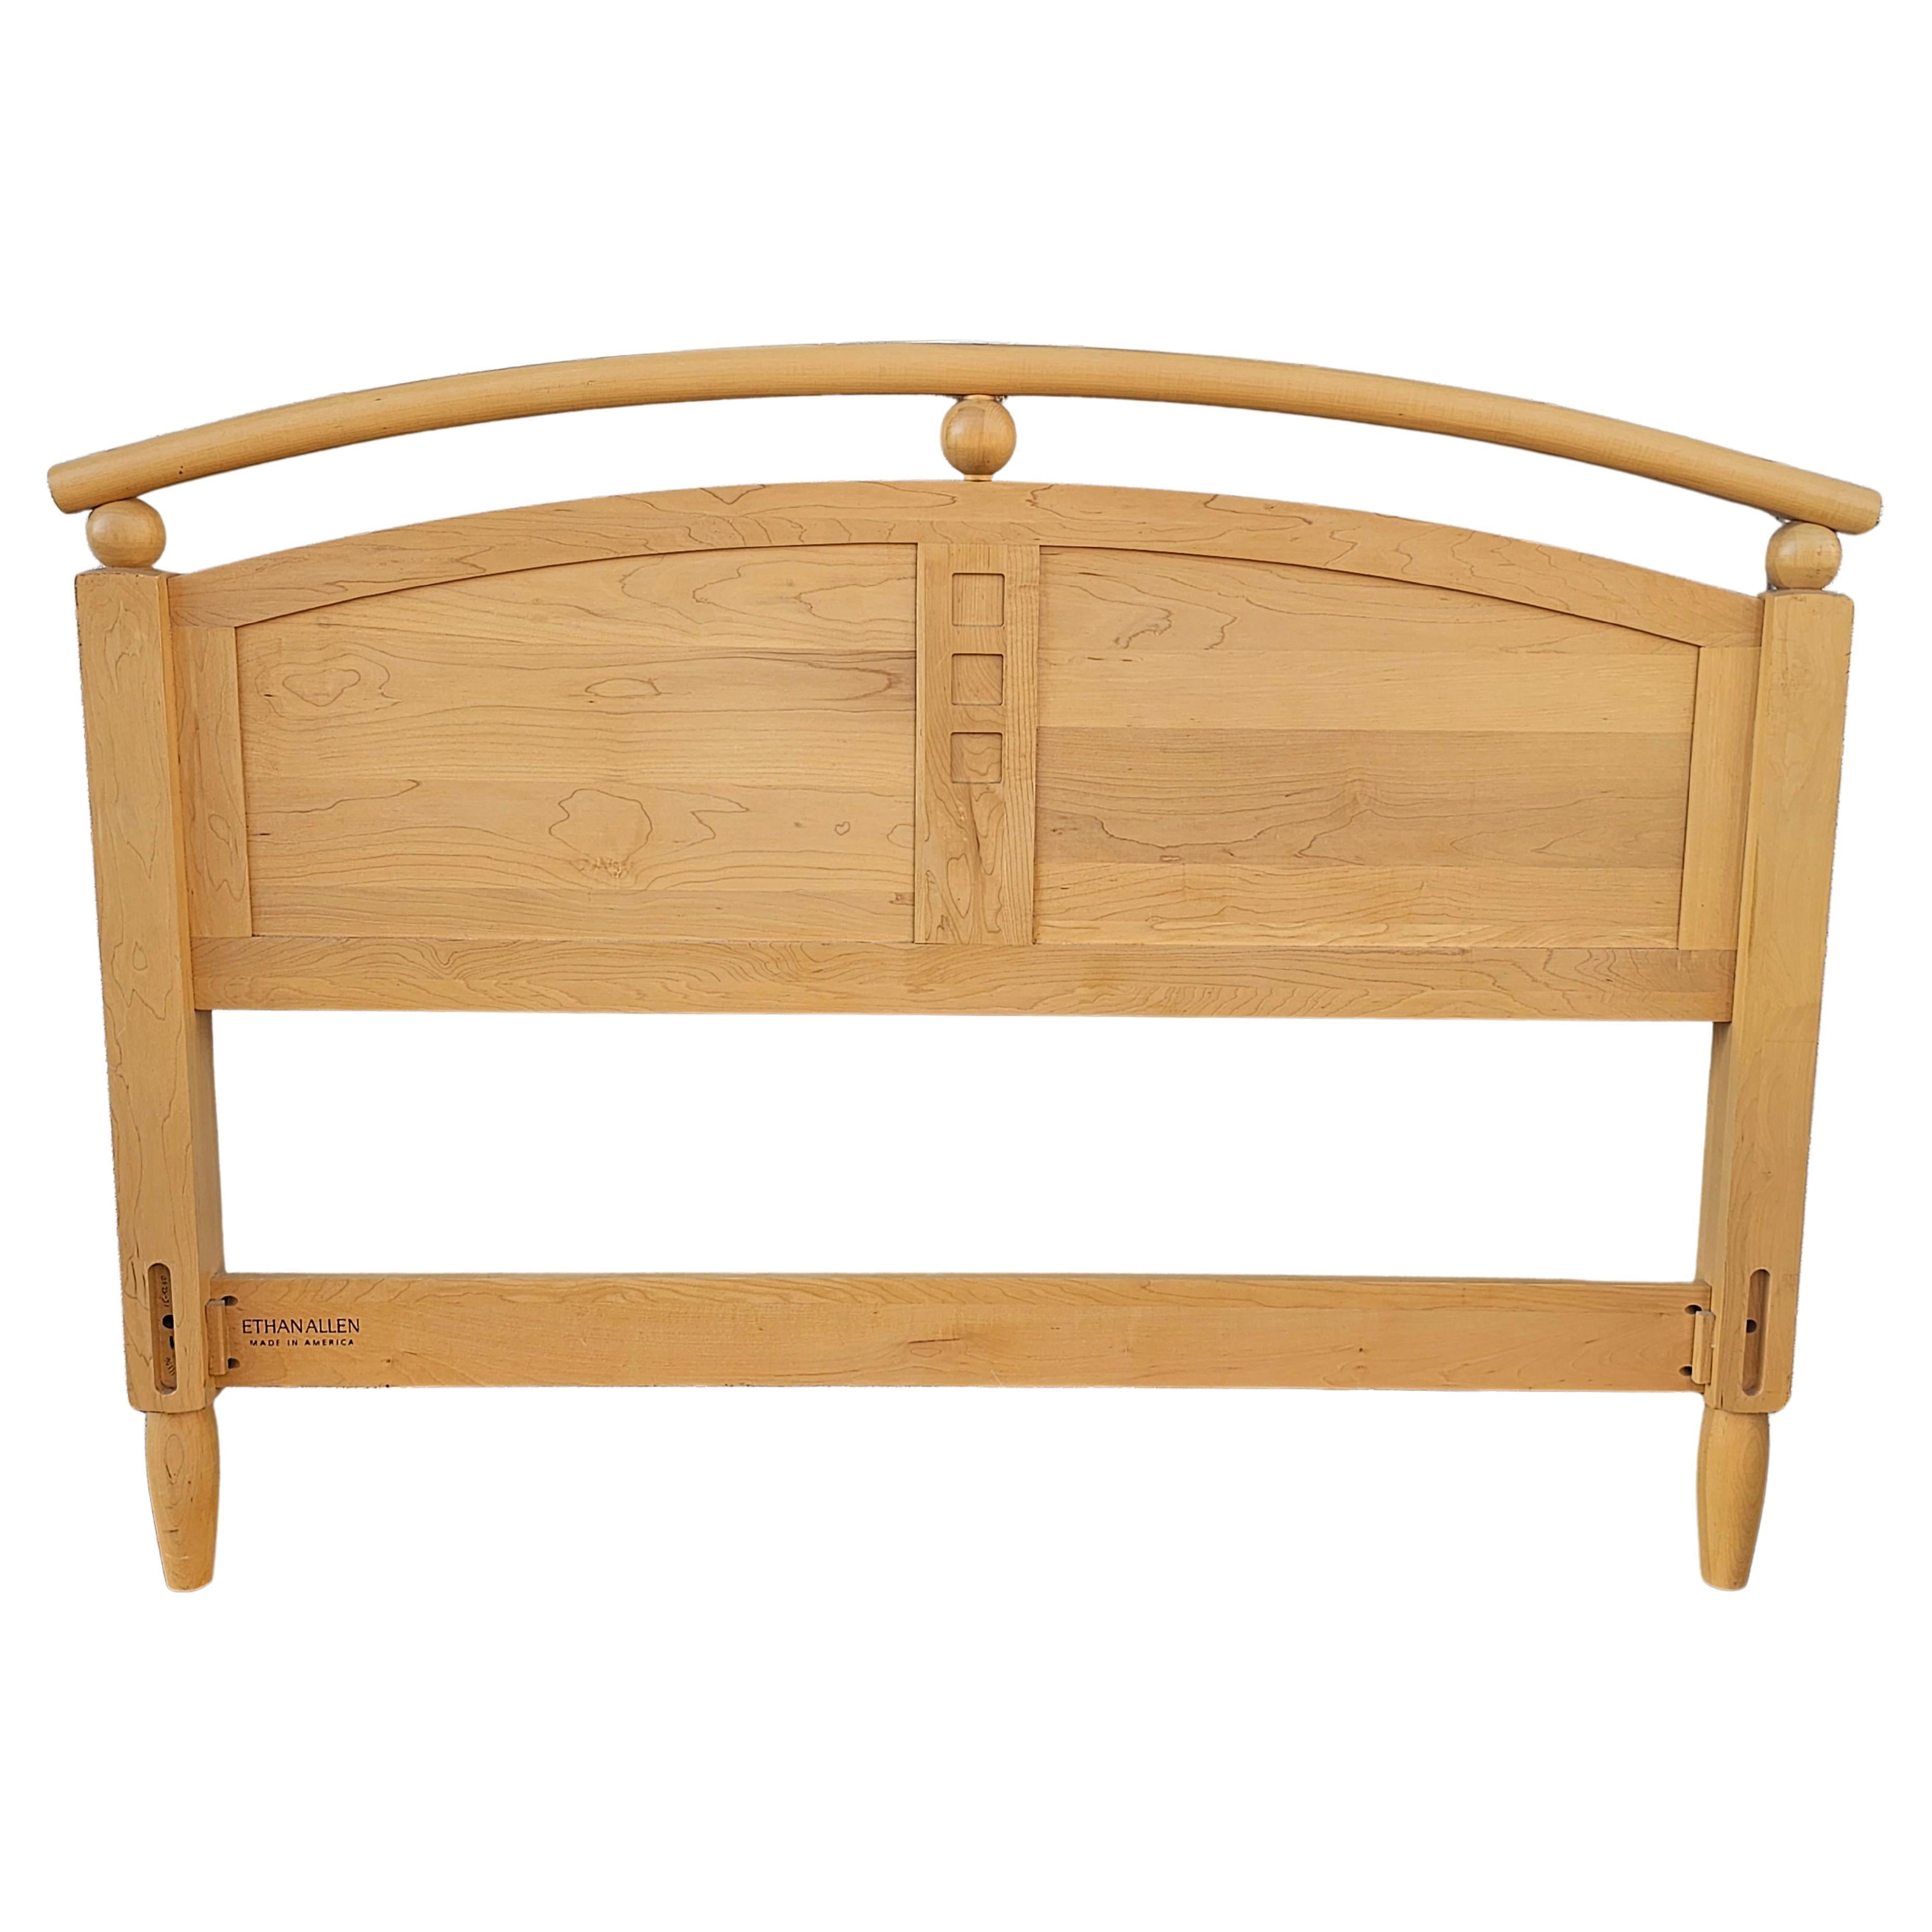 Late 20th Century American Solid Birch Arch Full Size Bedstead In Excellent Condition For Sale In Germantown, MD